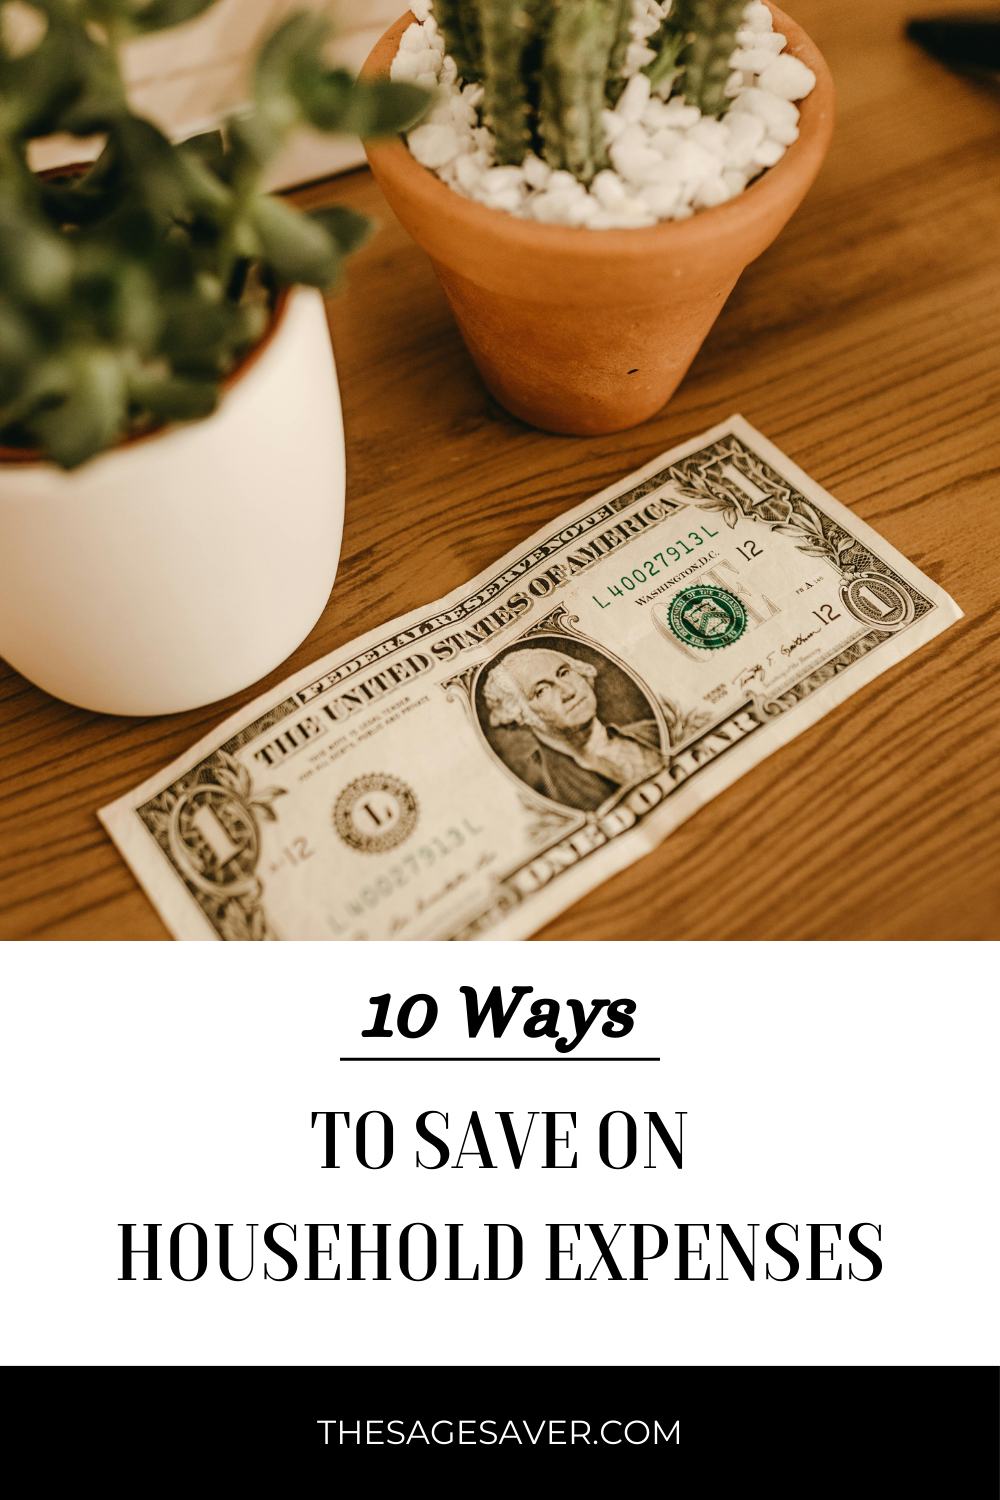 10 Easy Ways to Save Money on Household Expenses